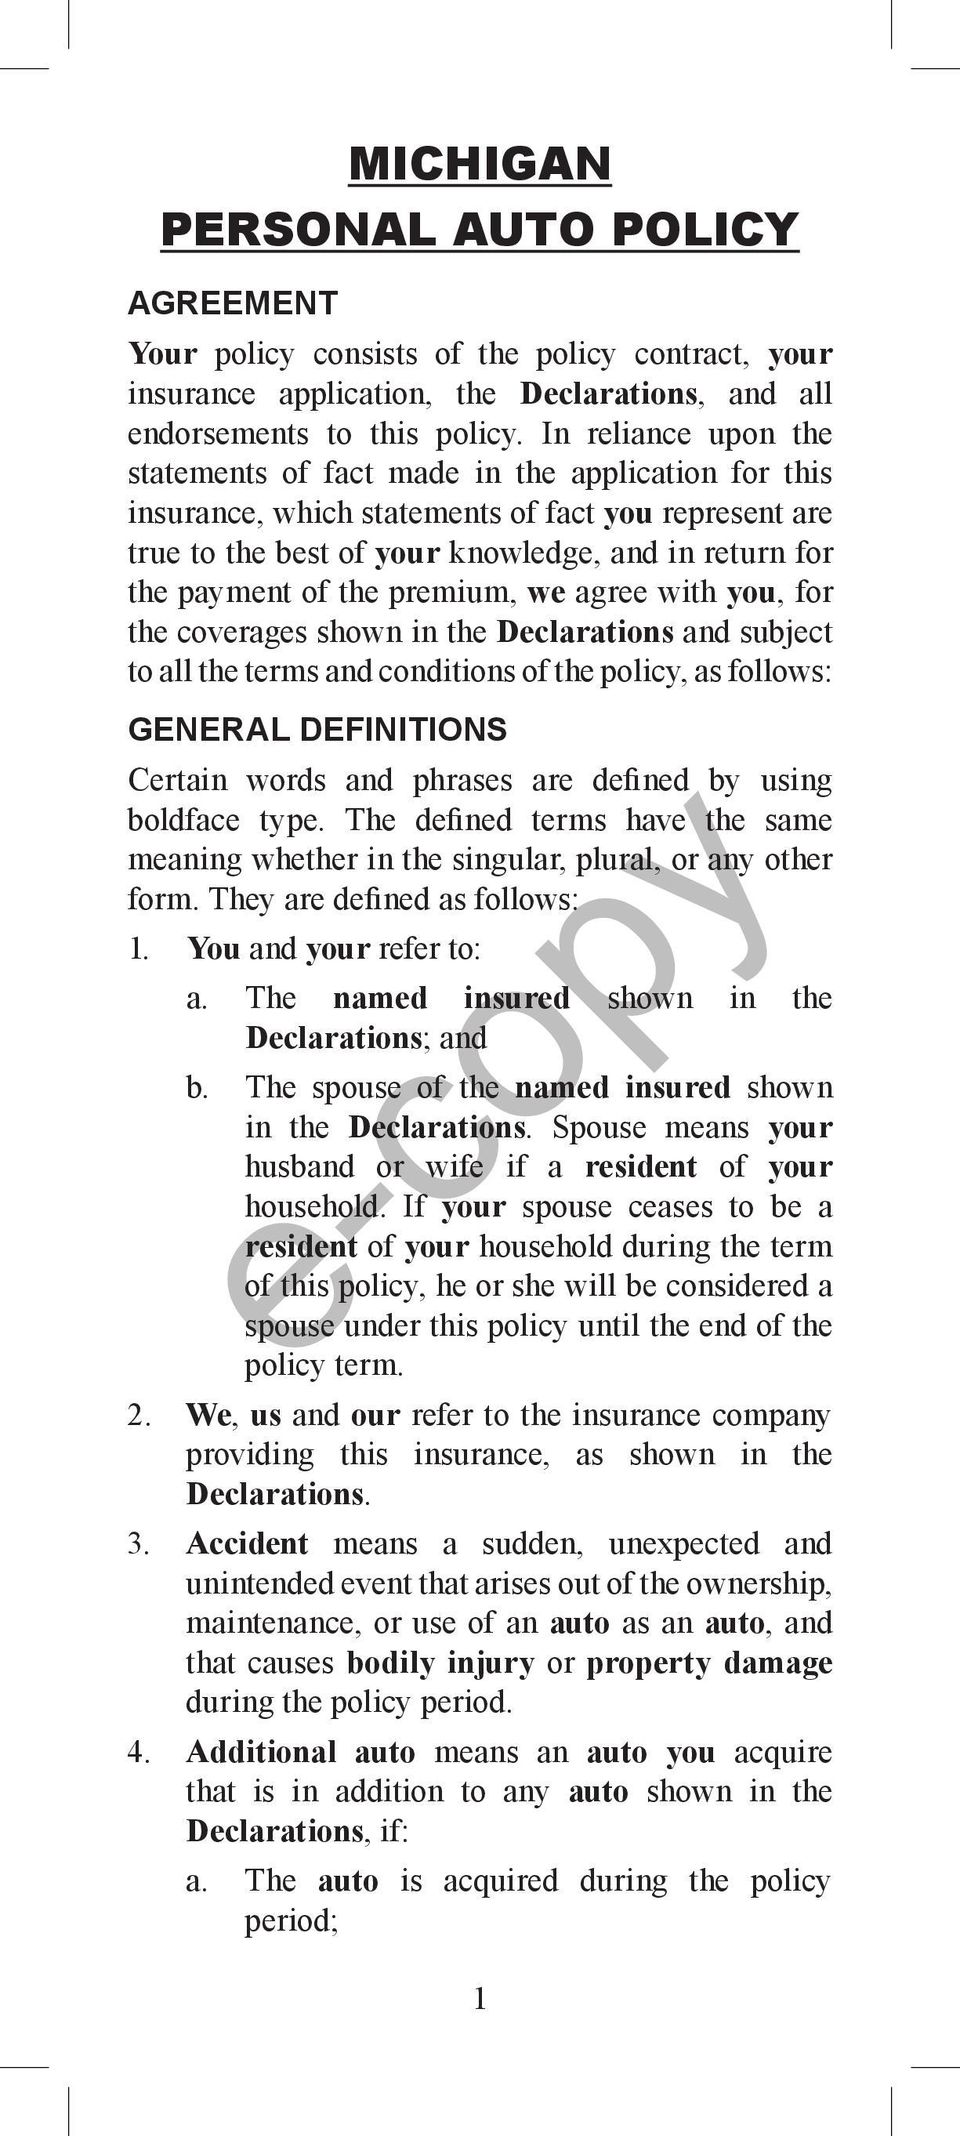 premium, we agree with you, for the coverages shown in the Declarations and subject to all the terms and conditions of the policy, as follows: GENERAL DEFINITIONS Certain words and phrases are